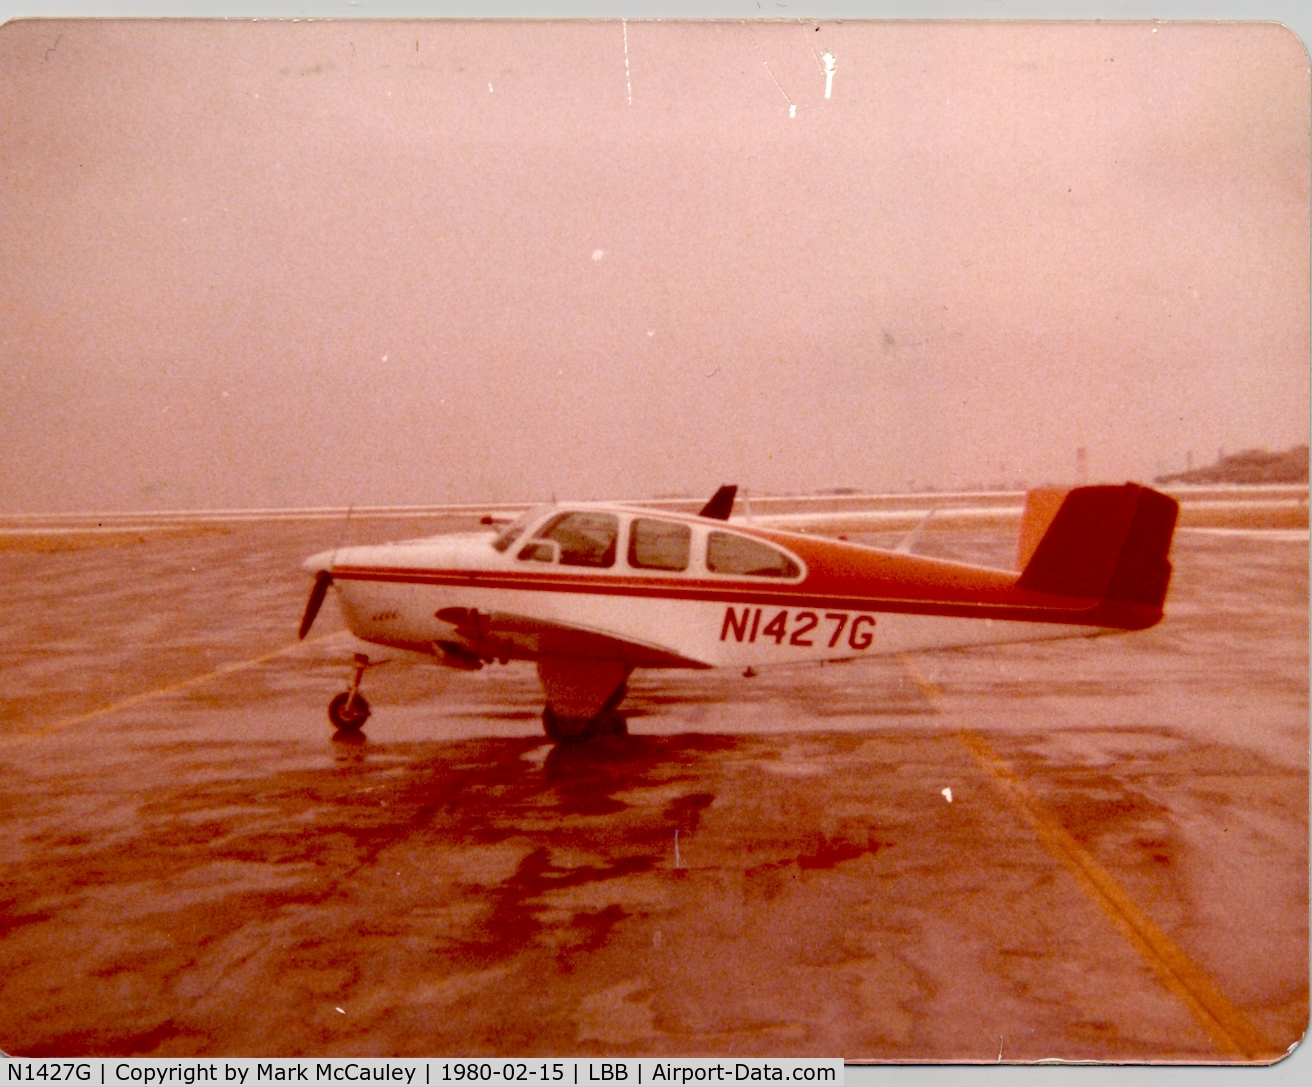 N1427G, 1962 Beech P35 Bonanza C/N D-6903, P35 Bonanza N1427G at Lubbock TX (1980) after my first flight in it from FTW as PIC.